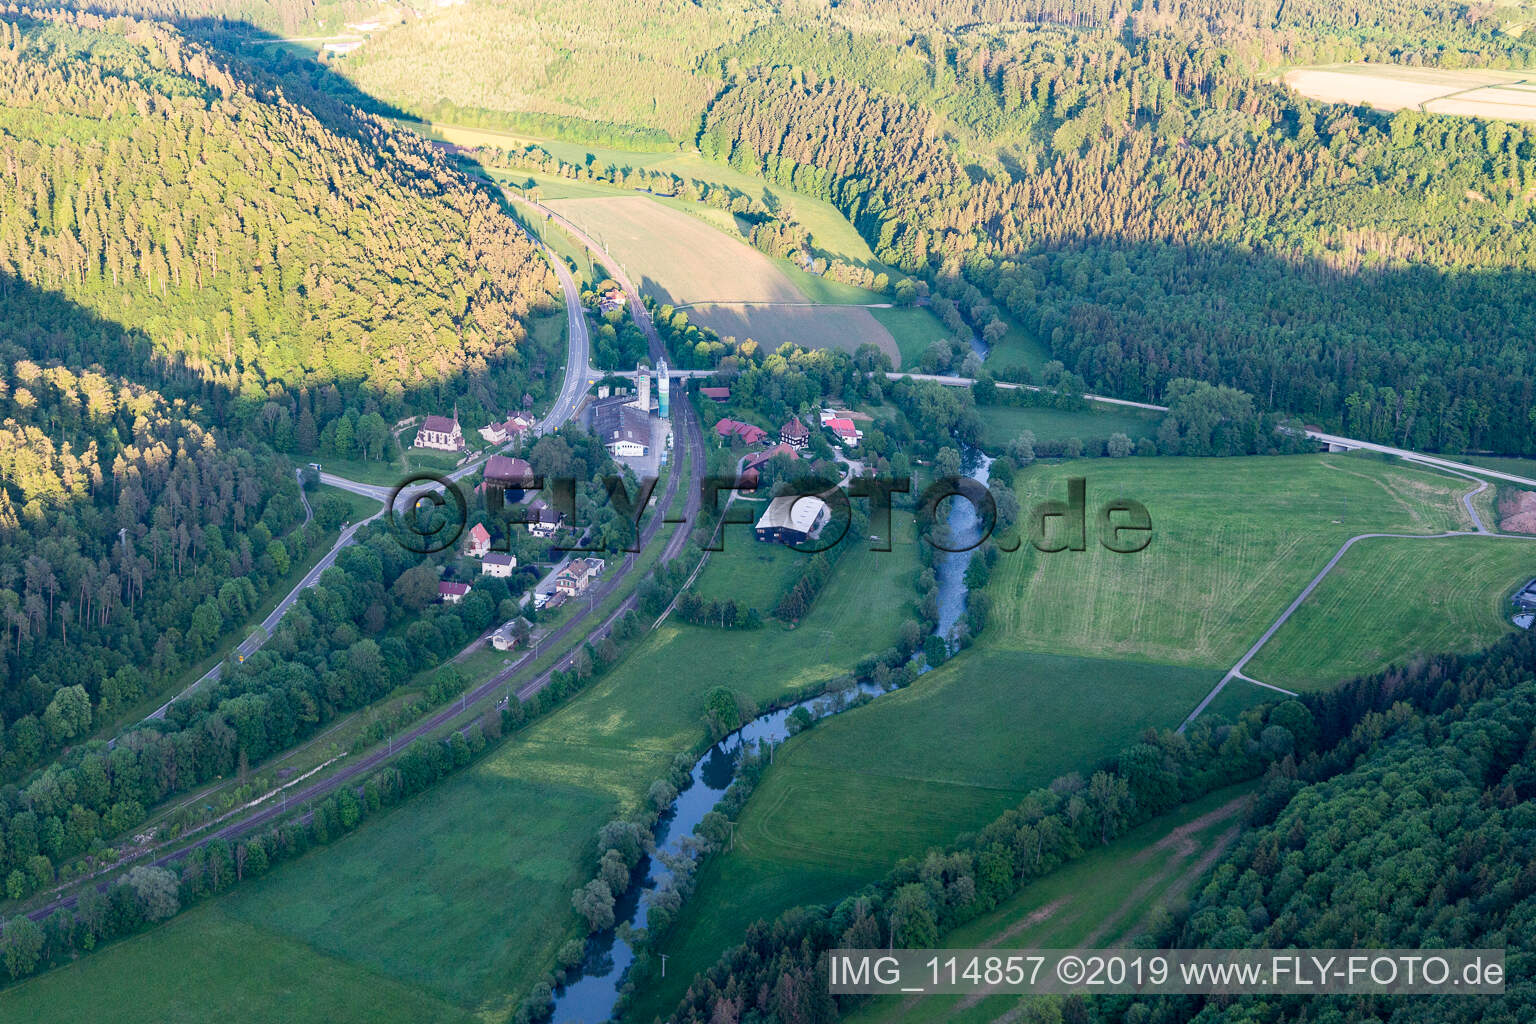 Horb am Neckar in the state Baden-Wuerttemberg, Germany seen from above